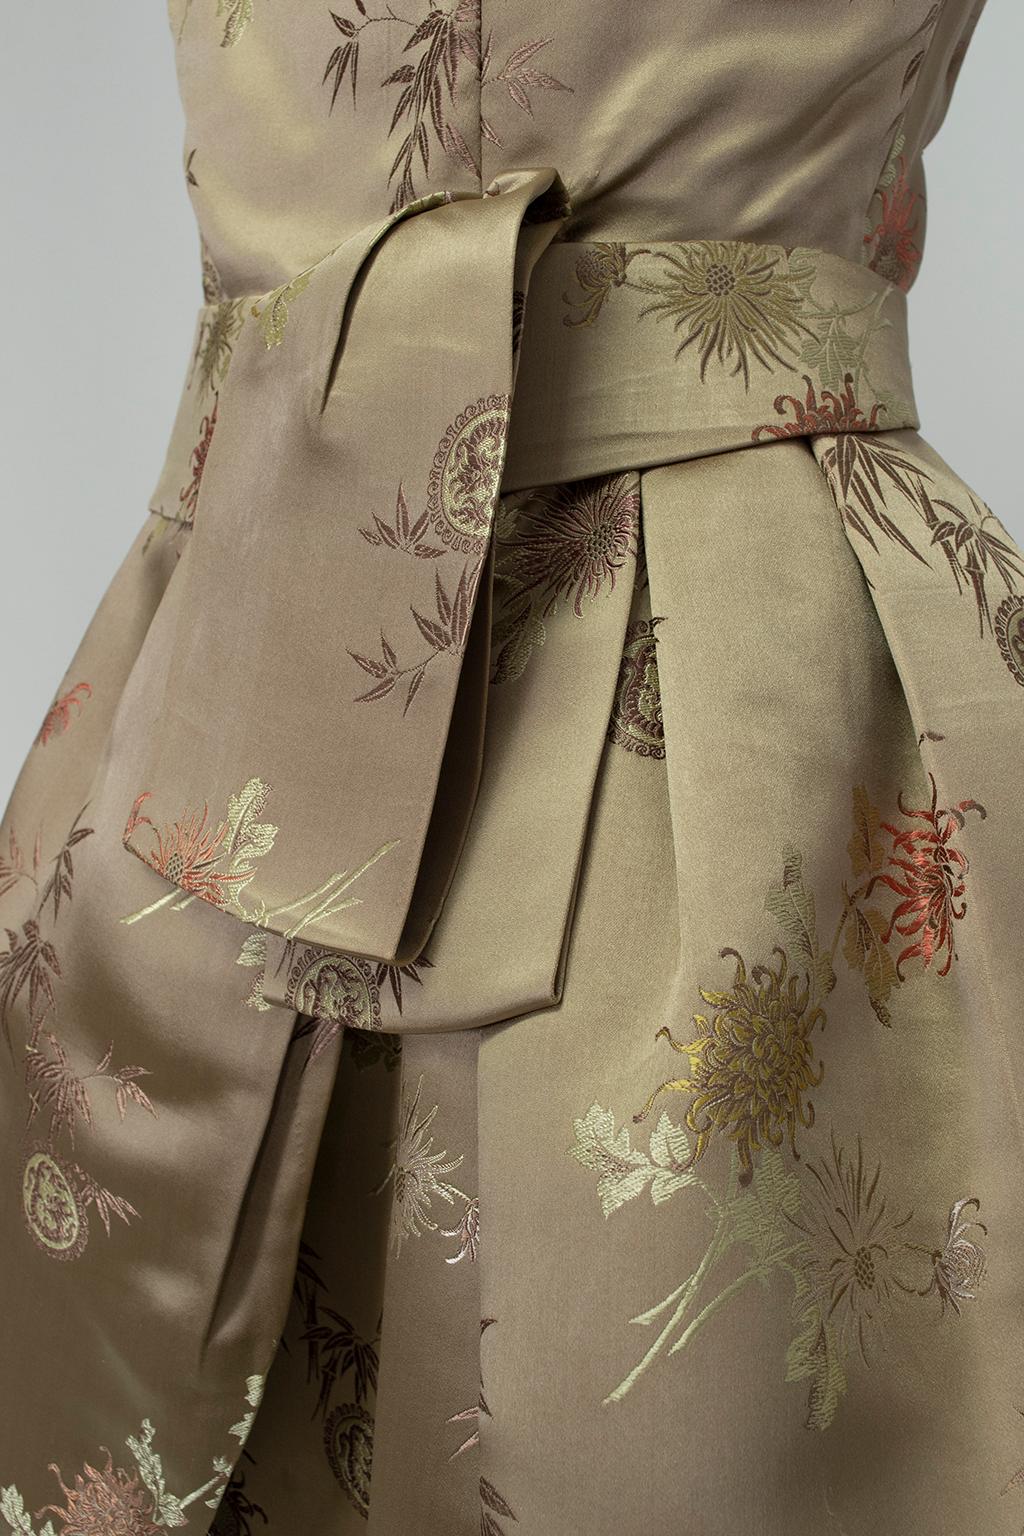 Jacques Cassia Haute Couture Taupe Brocade Corolle Tulip Skirt Dress - S, 1960s For Sale 6